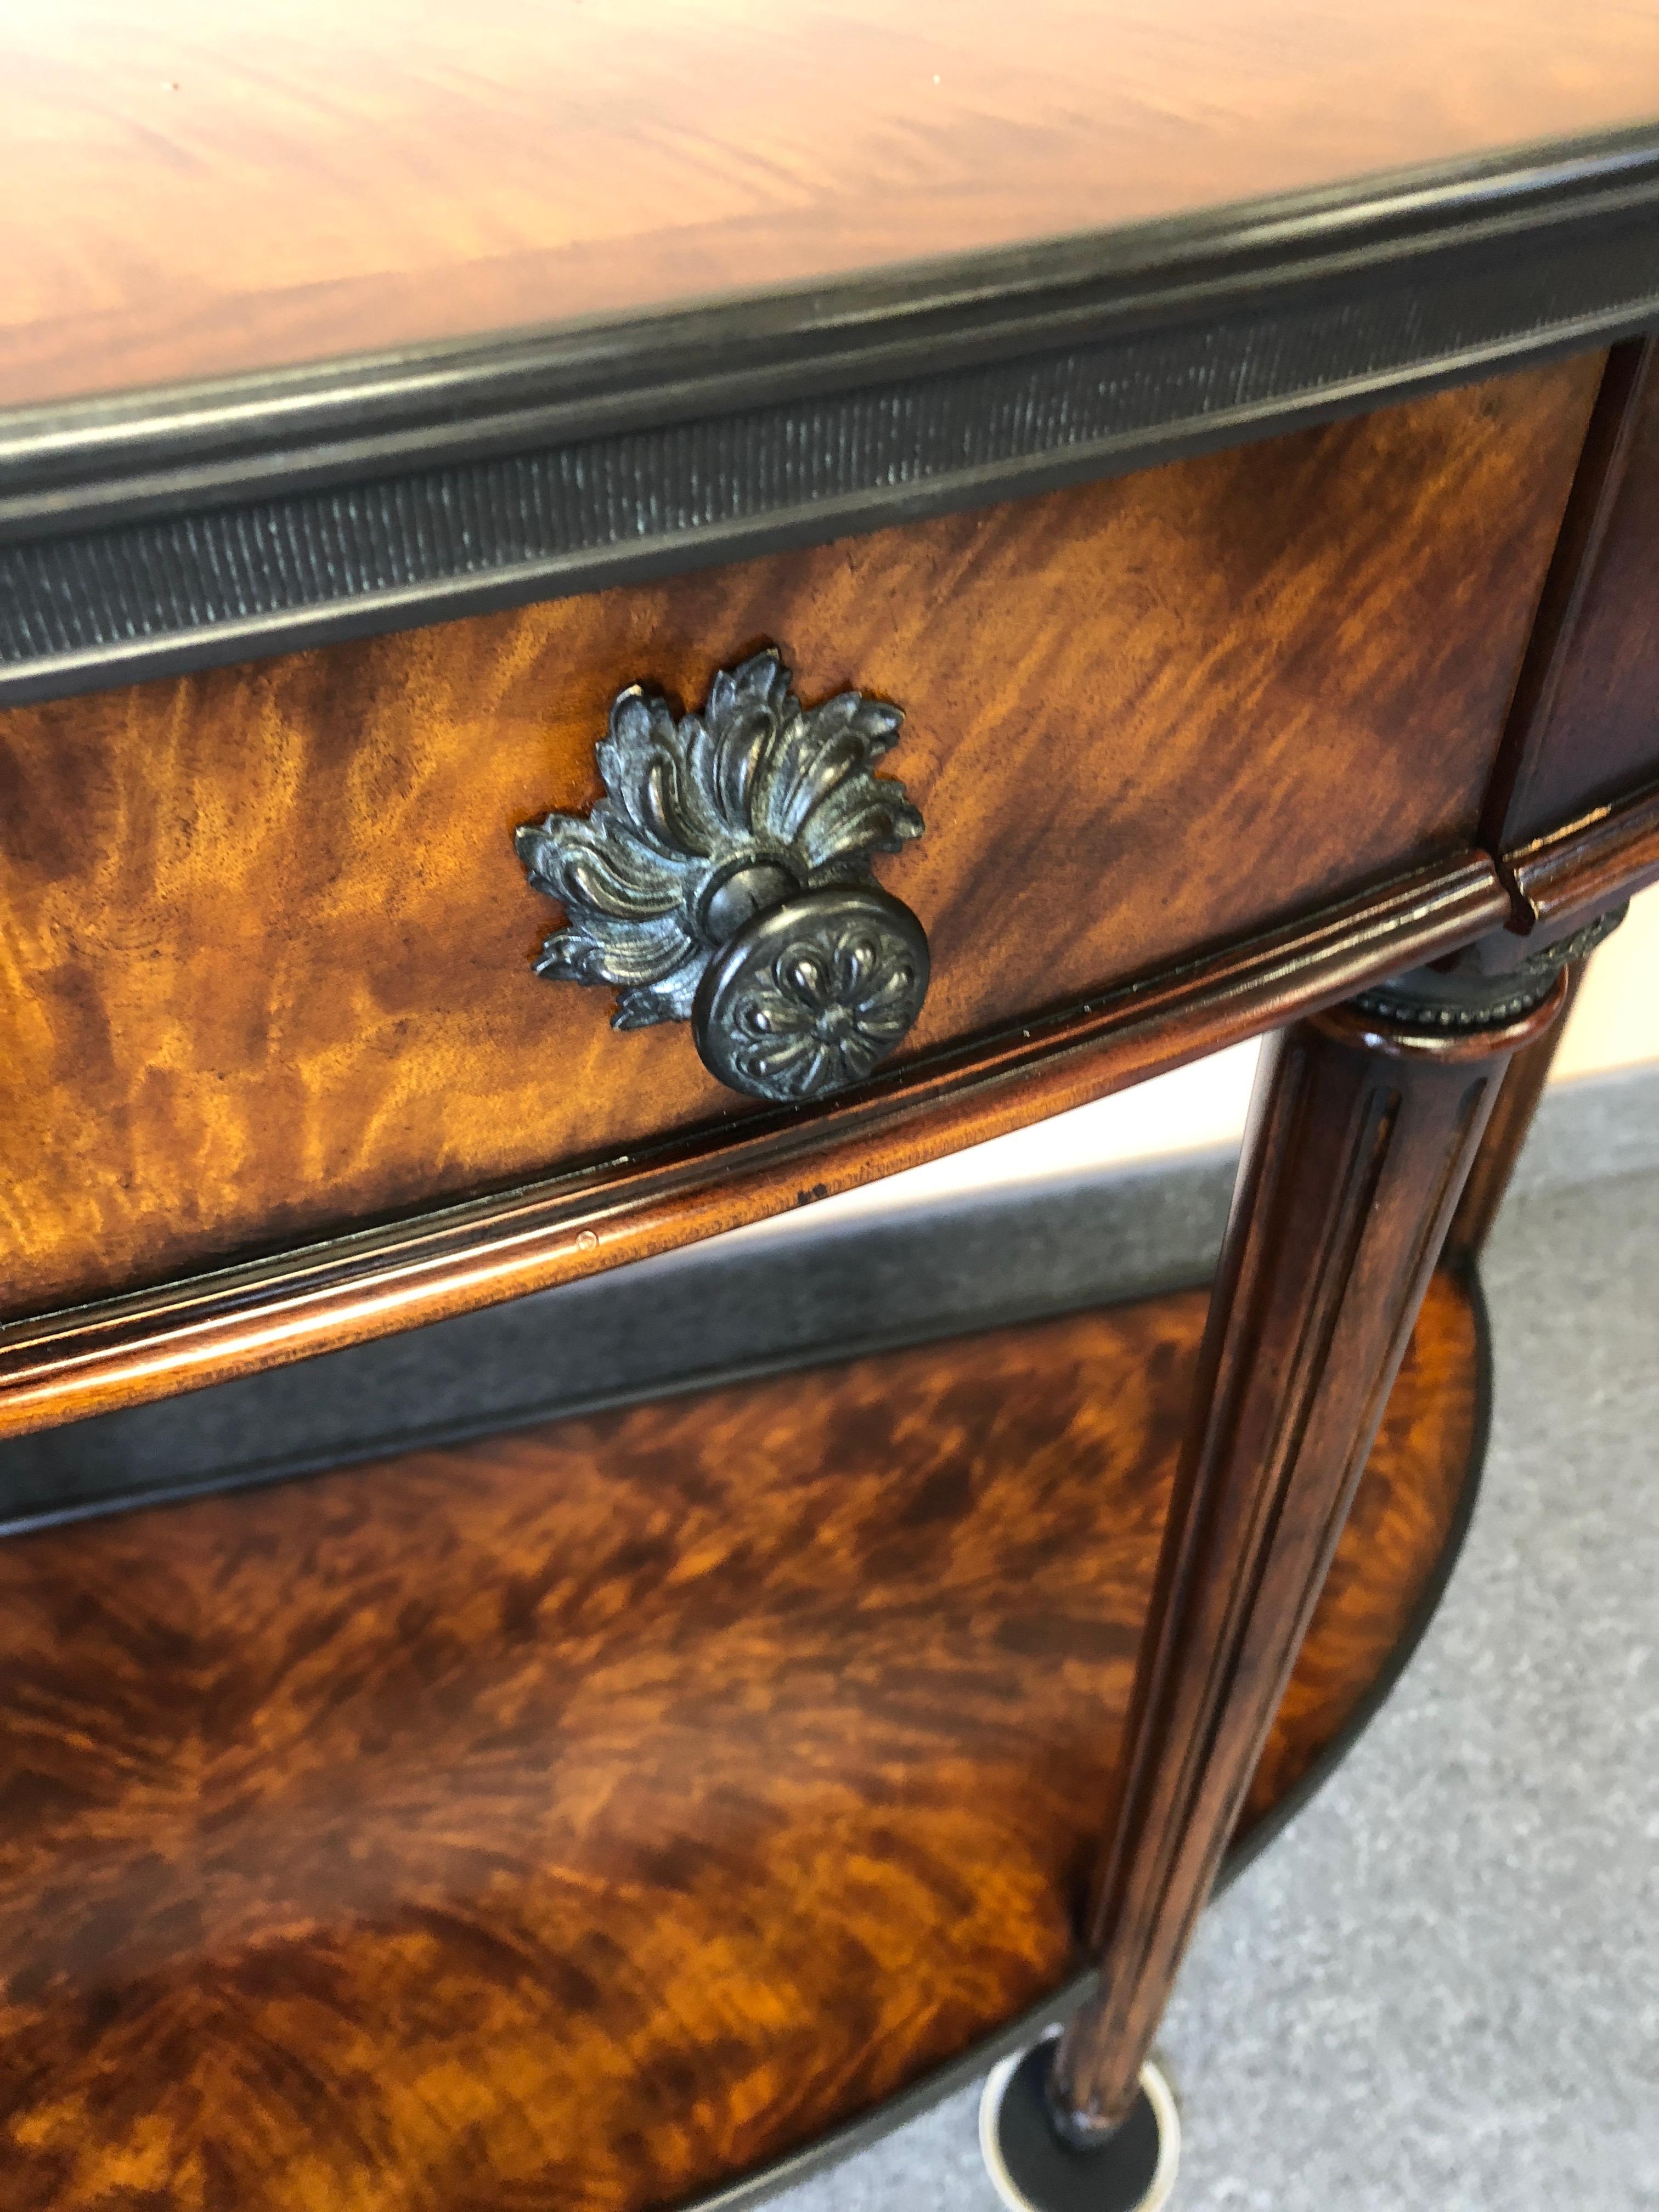 Magnificent bookmatched flame mahogany two-tier demilune console having handsome dark bronze hardware, tapered reeded legs, single drawer and acanthus leaf bronze capped feet.